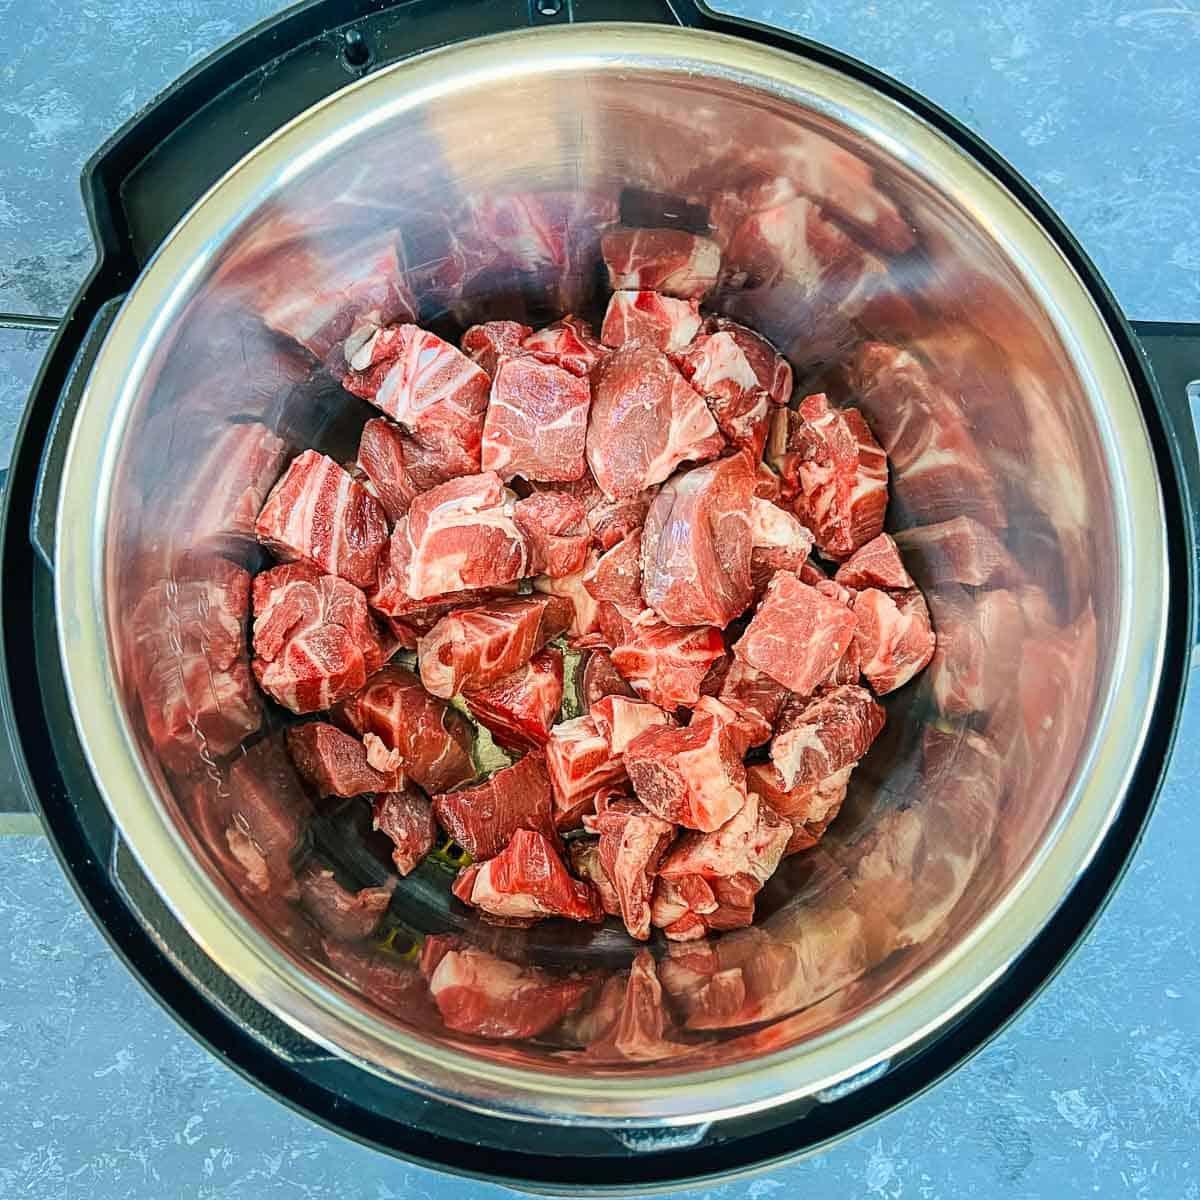 Sauted whole spices and lamb in the Instant Pot.